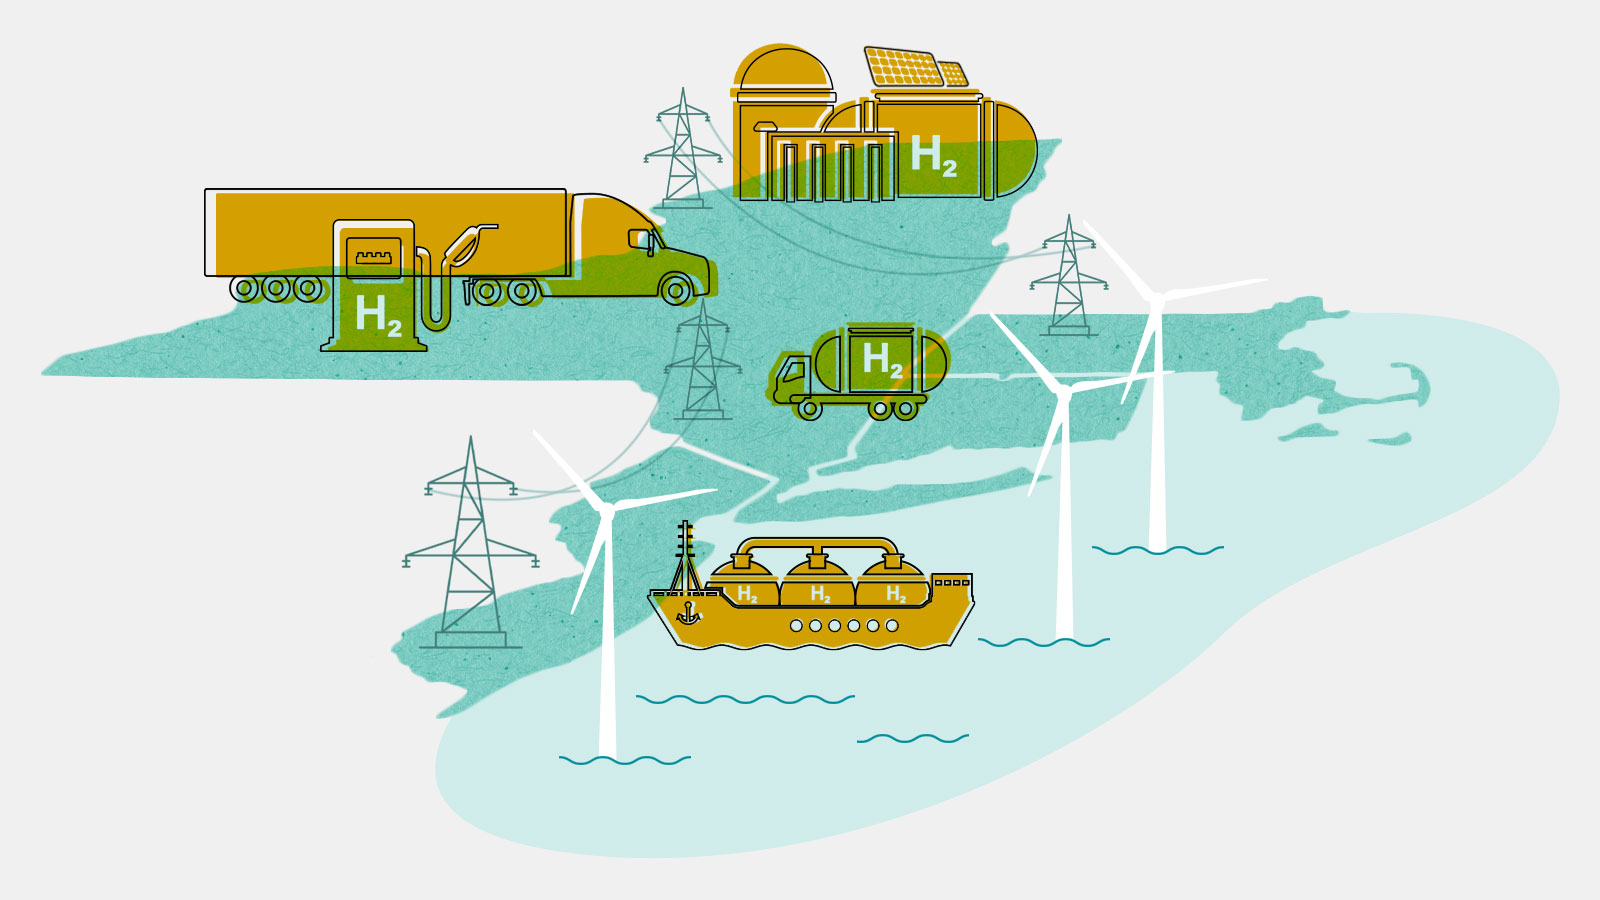 Illustration: A hydrogen storage facility, semi-truck with hydrogen fuel pump, truck transporting hydrogen, and electric towers on top of silhouettes of New York, Massachusetts, Connecticut, and New Jersey. To the right of the states are offshore wind turbines and a cargo ship transporting tanks of hydrogen.